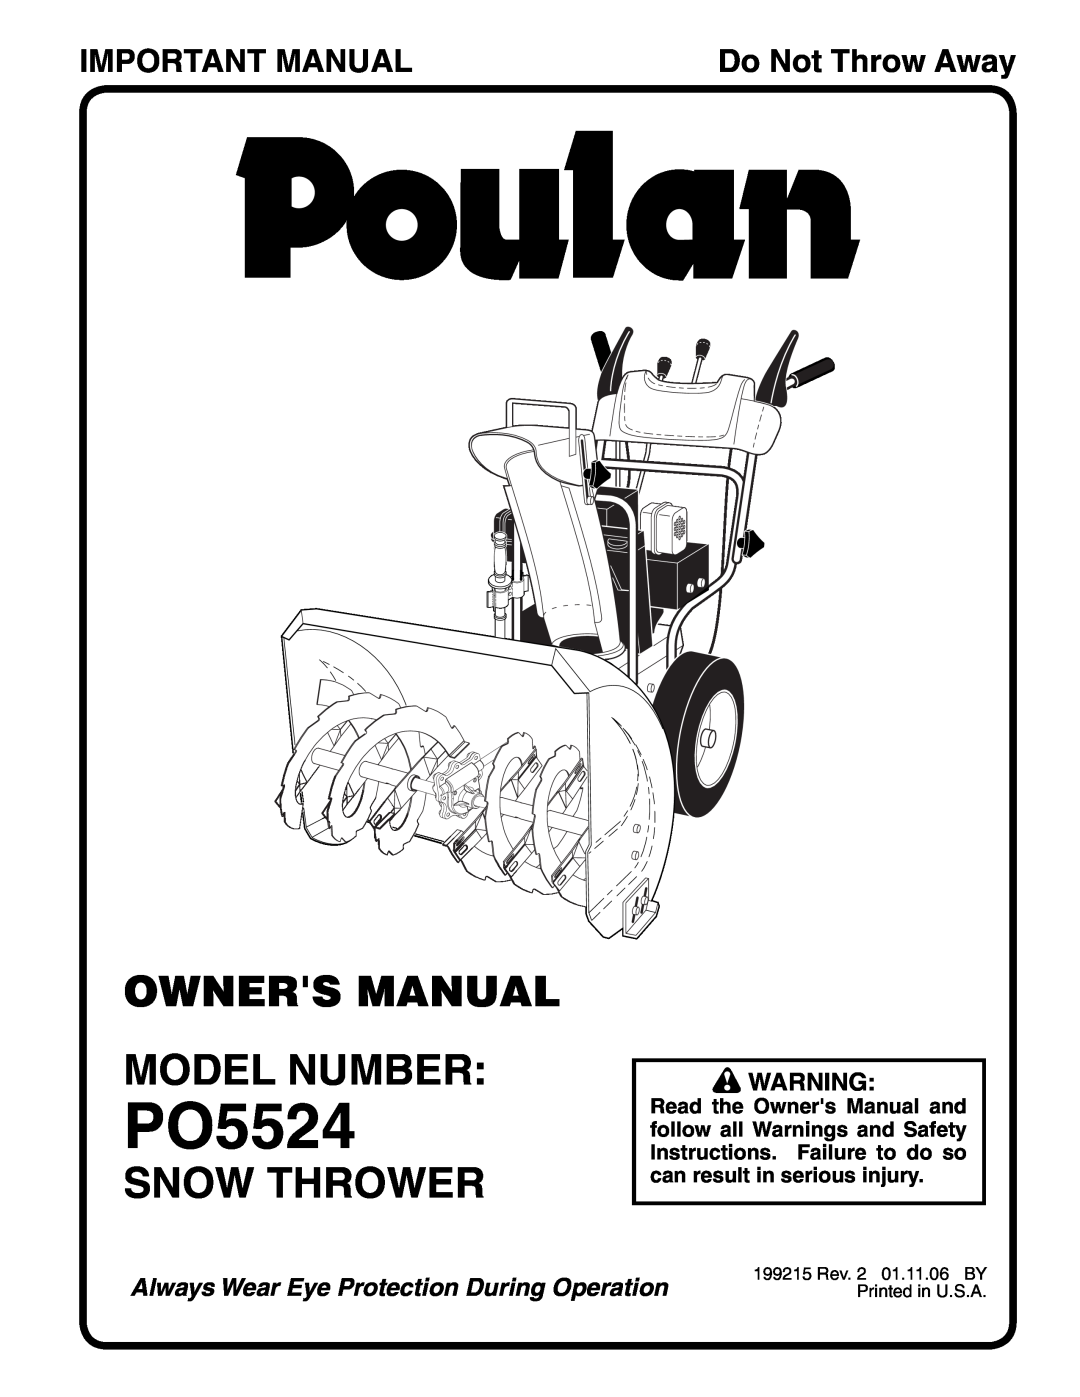 Poulan PO5524 owner manual Snow Thrower, Important Manual, Do Not Throw Away, Always Wear Eye Protection During Operation 